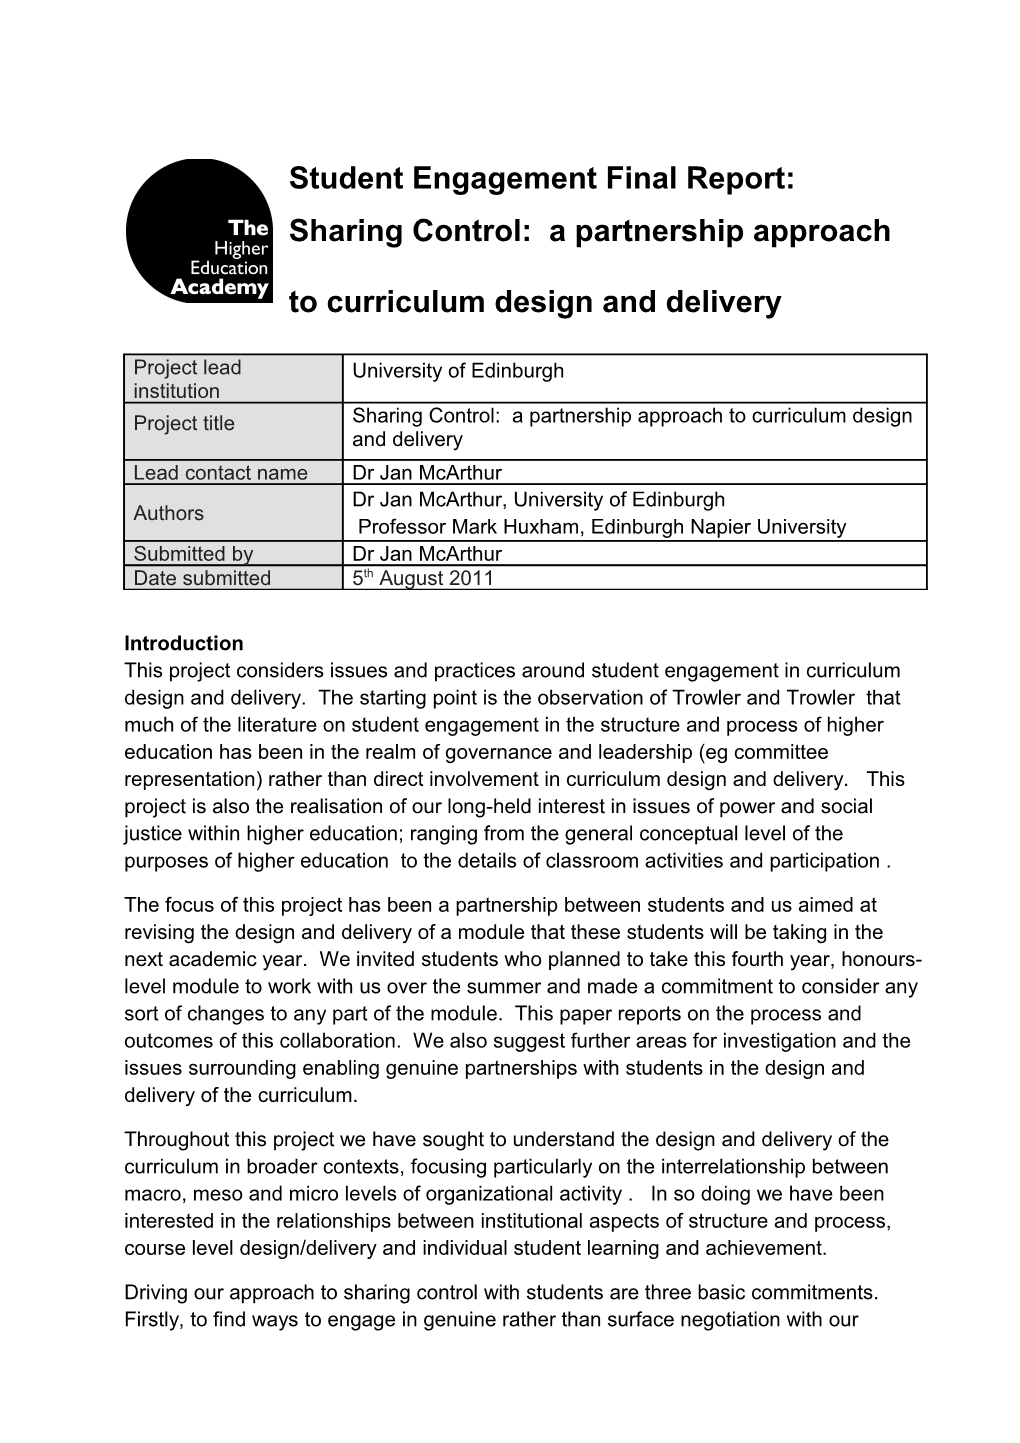 Sharing Control: a Partnership Approach to Curriculum Design and Delivery